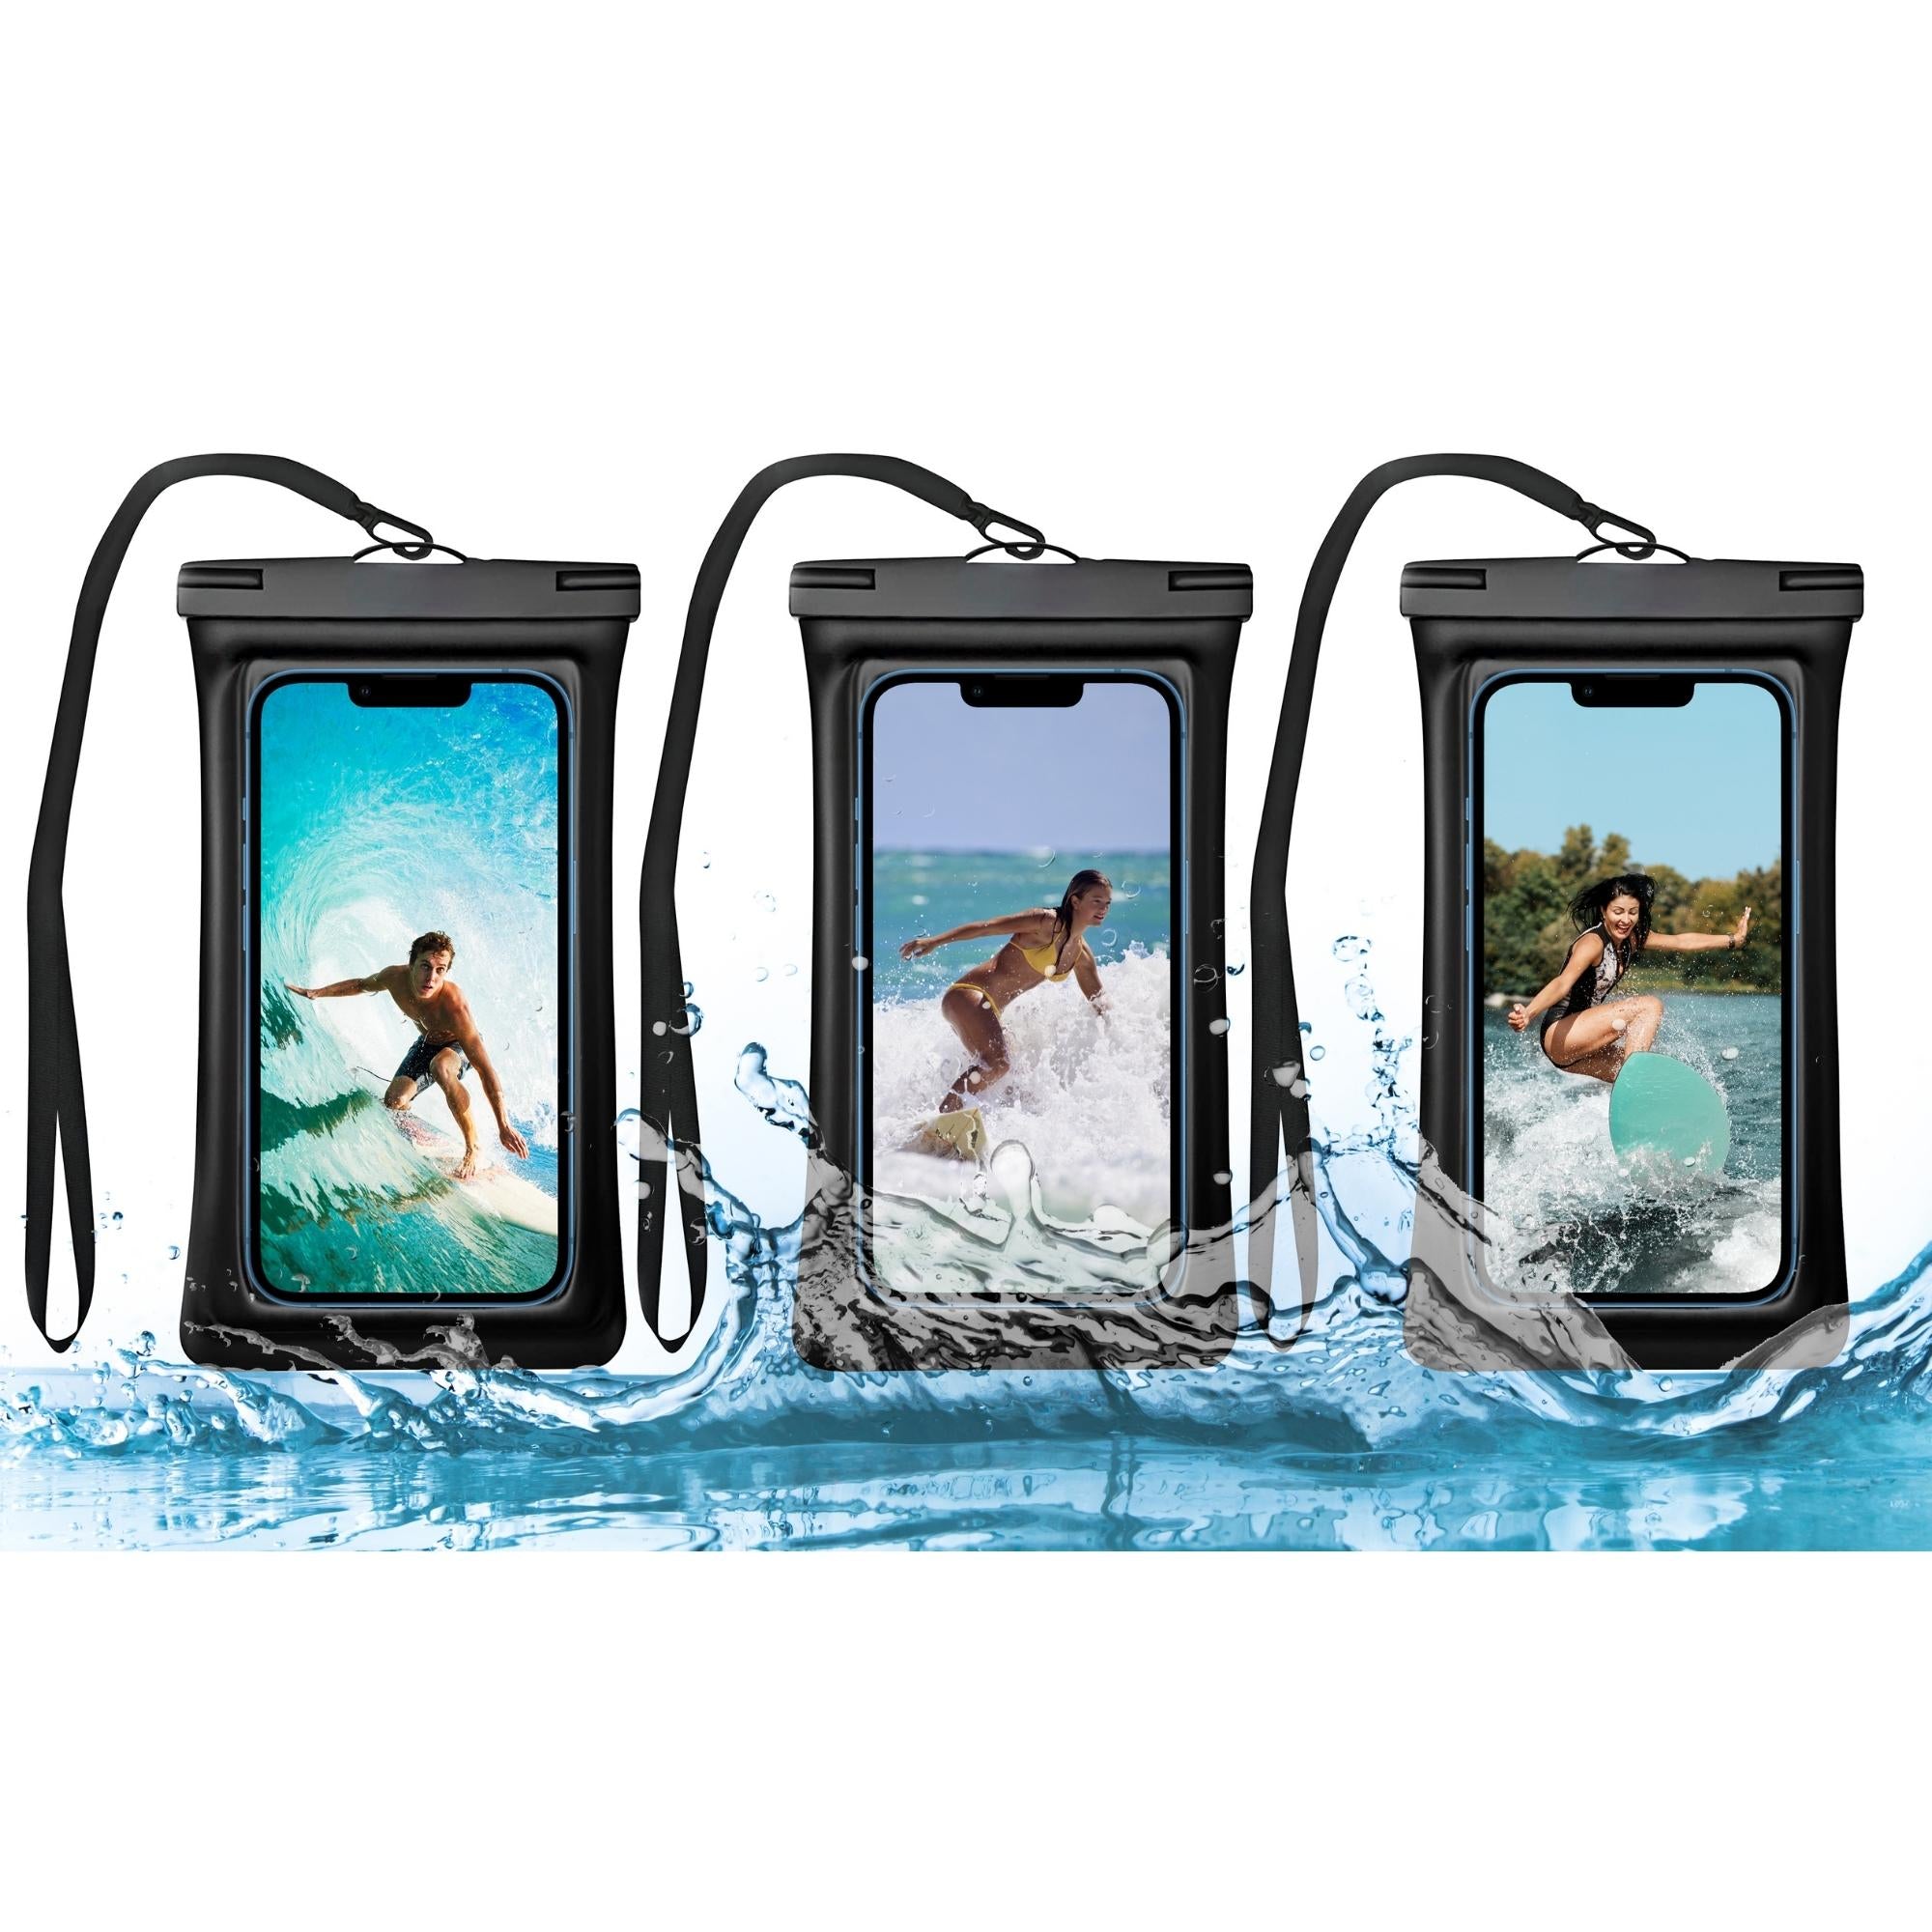 Multipack Waterproof Cellphone Pouch with Neck Cord (3-Pack)